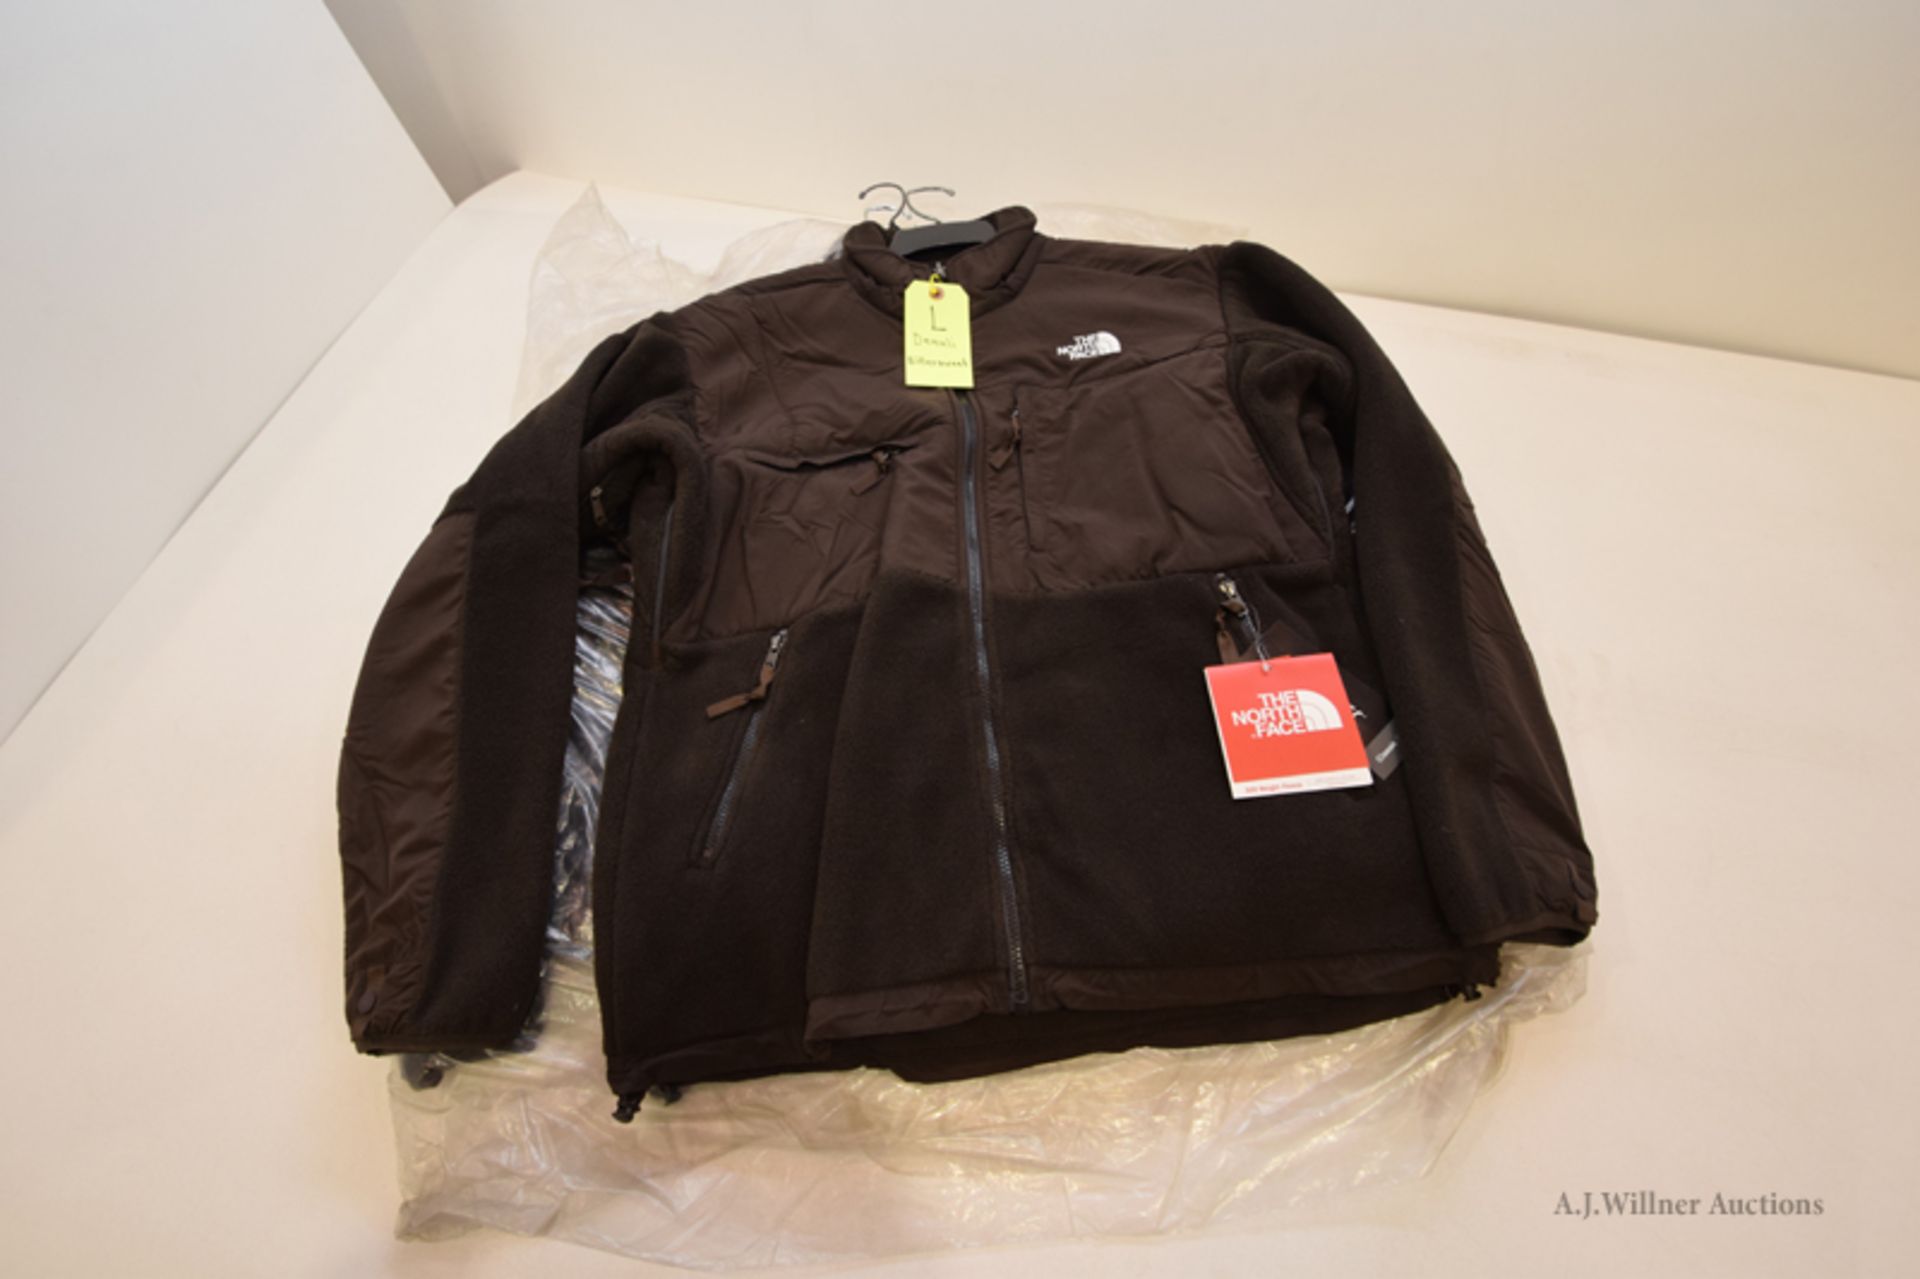 The North Face Clothing - Image 3 of 6